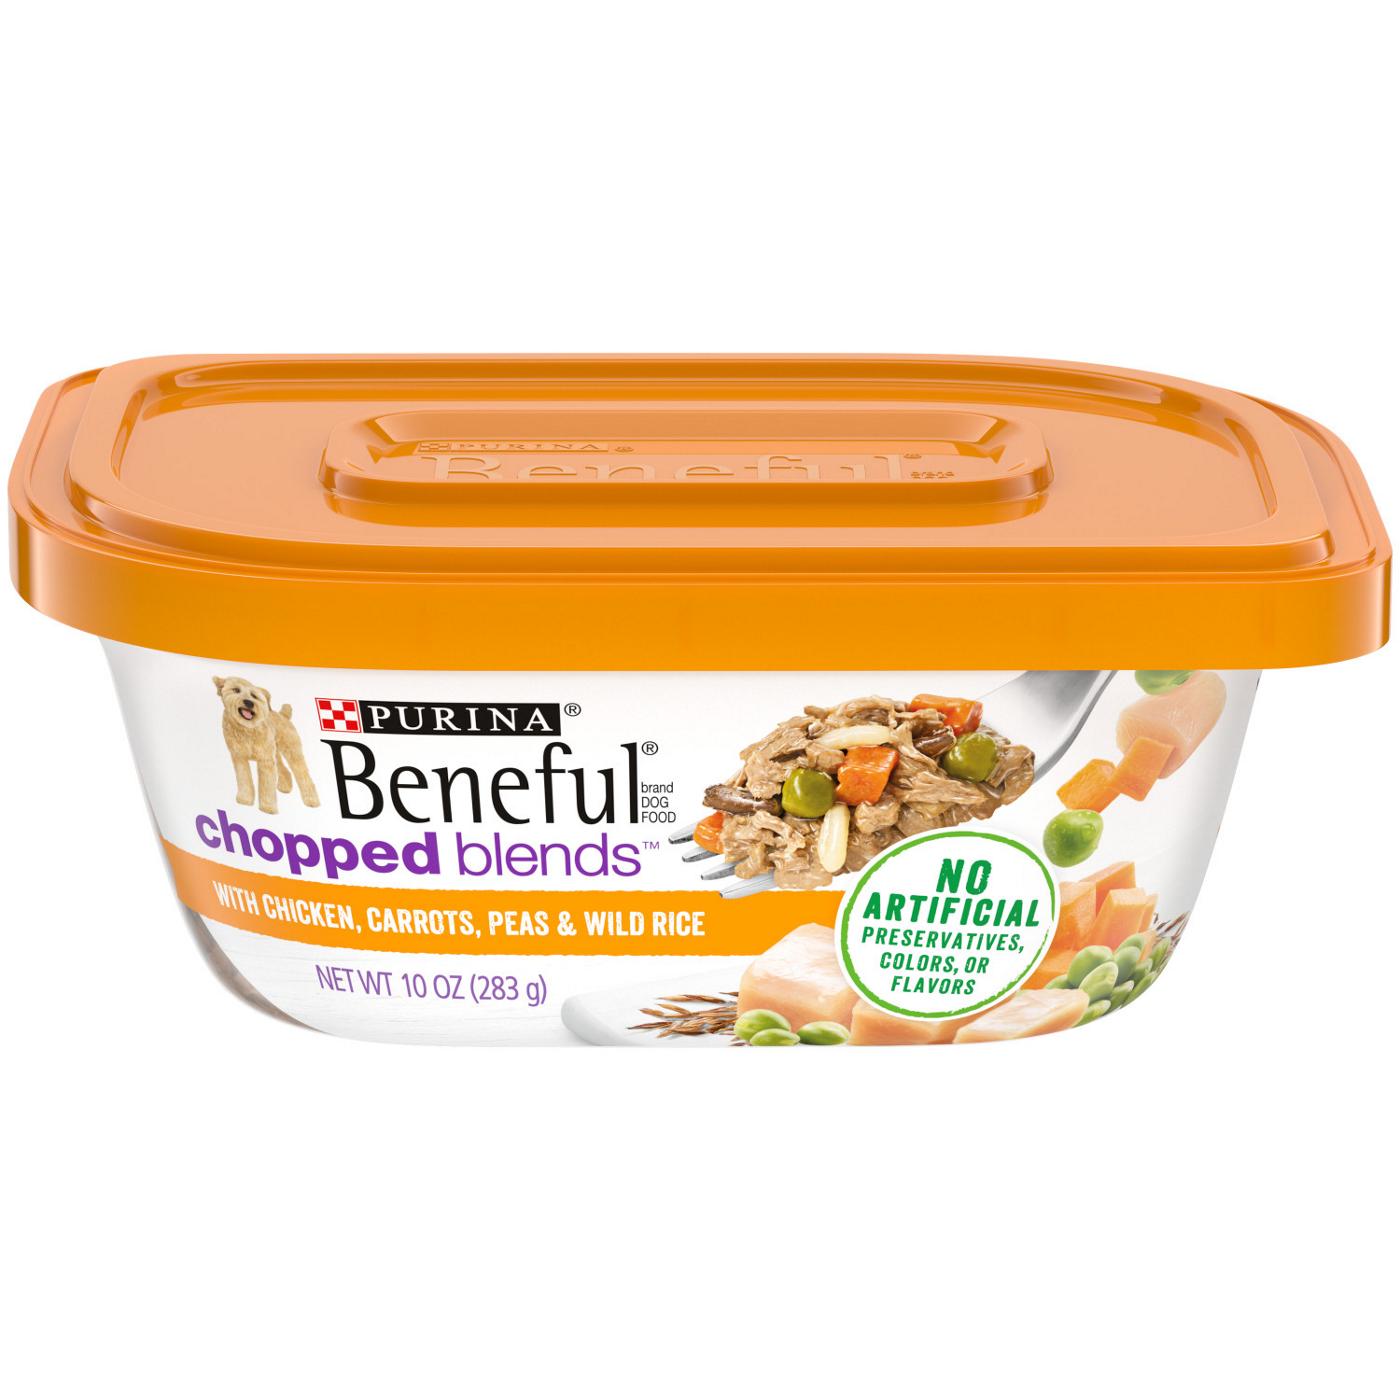 Beneful Purina Beneful Gravy, High Protein Wet Dog Food, Chopped Blends With Chicken; image 1 of 8